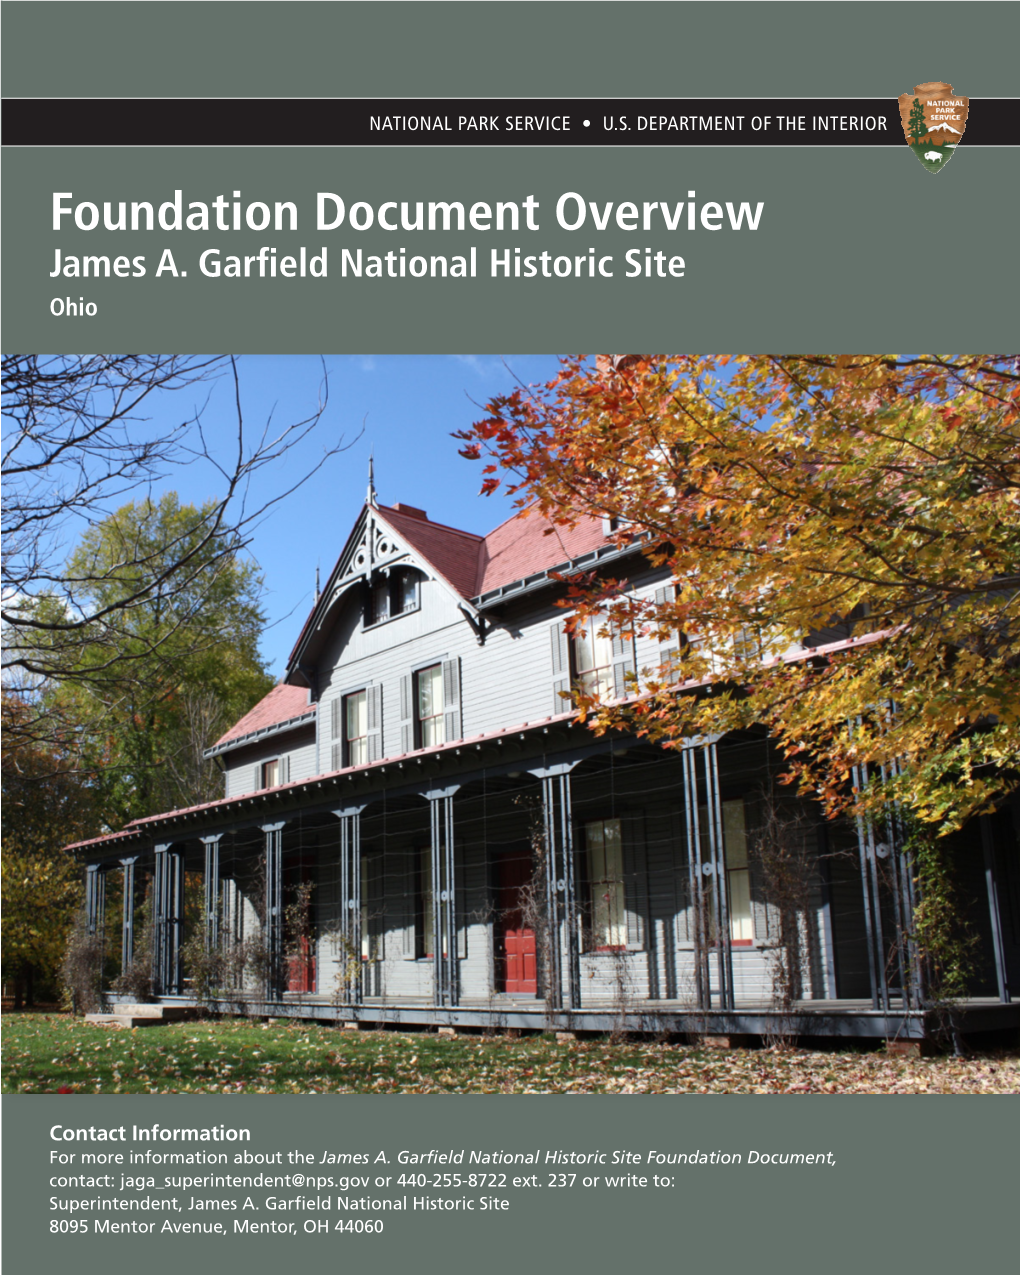 Foundation Document Overview, James A. Garfield National Historic